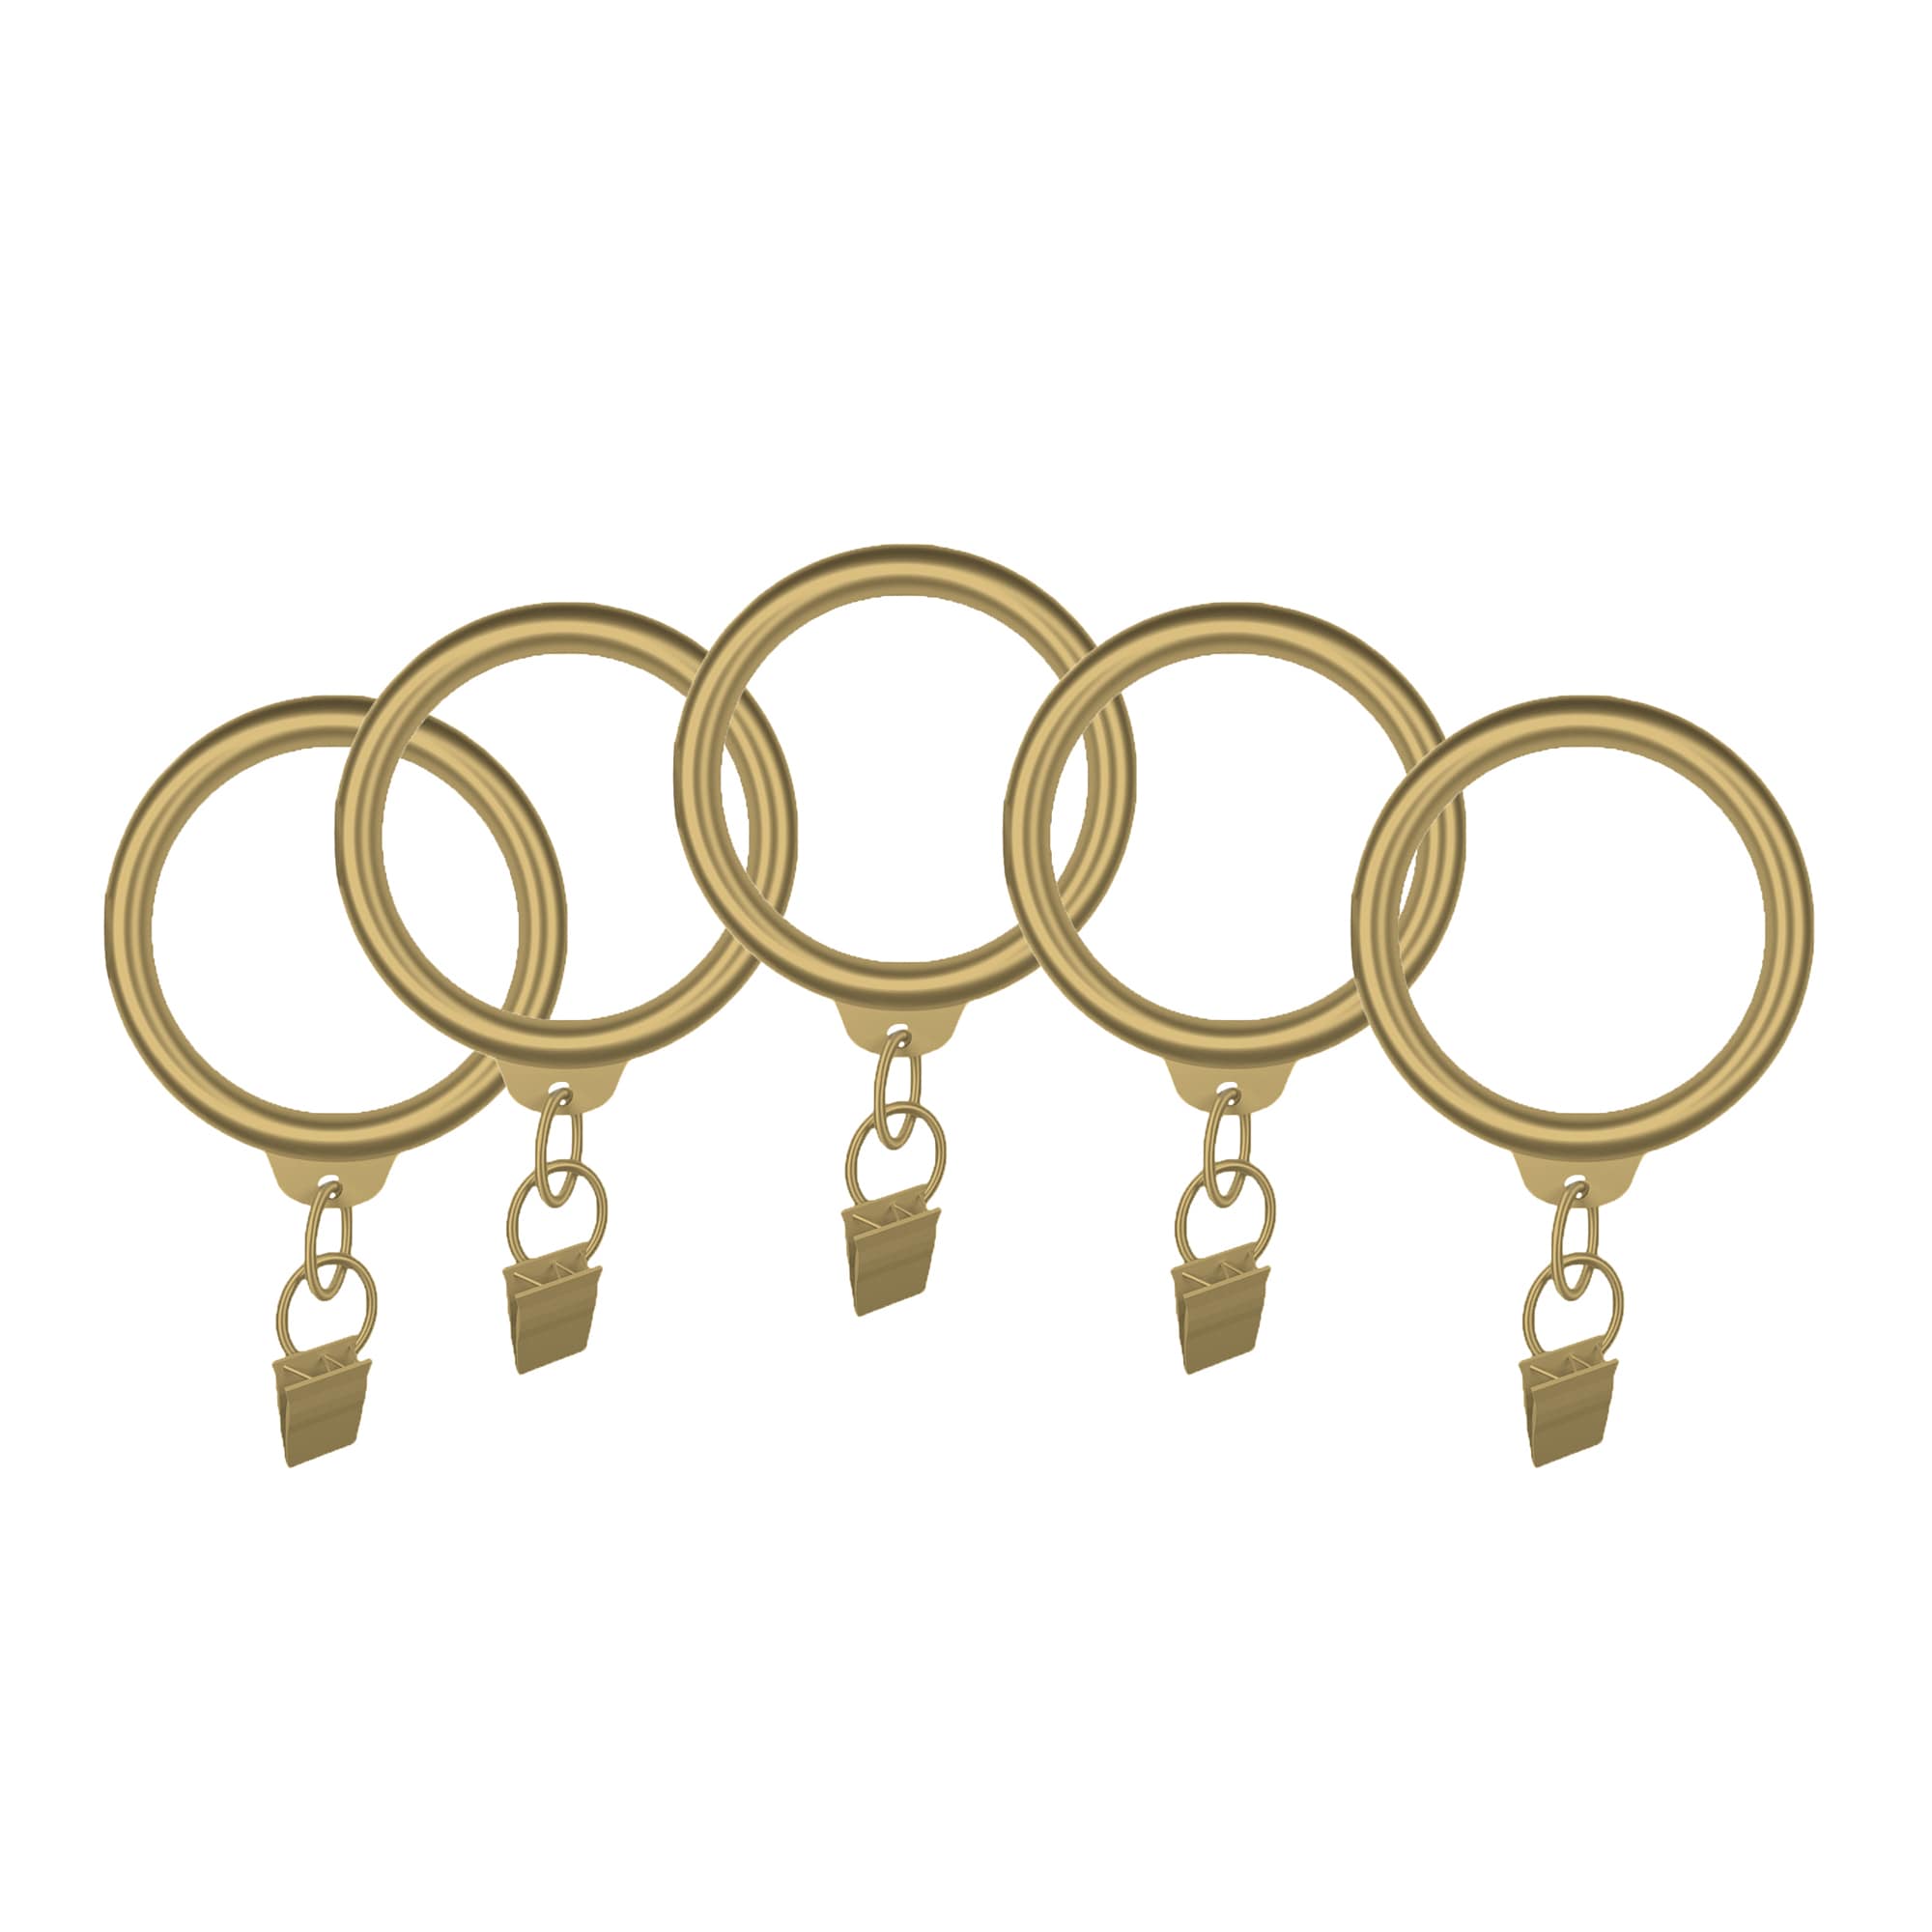 Amazing Drapery Hardware Cafe Curtain Ring Clips, 1 1/4 inch, 12 Pack